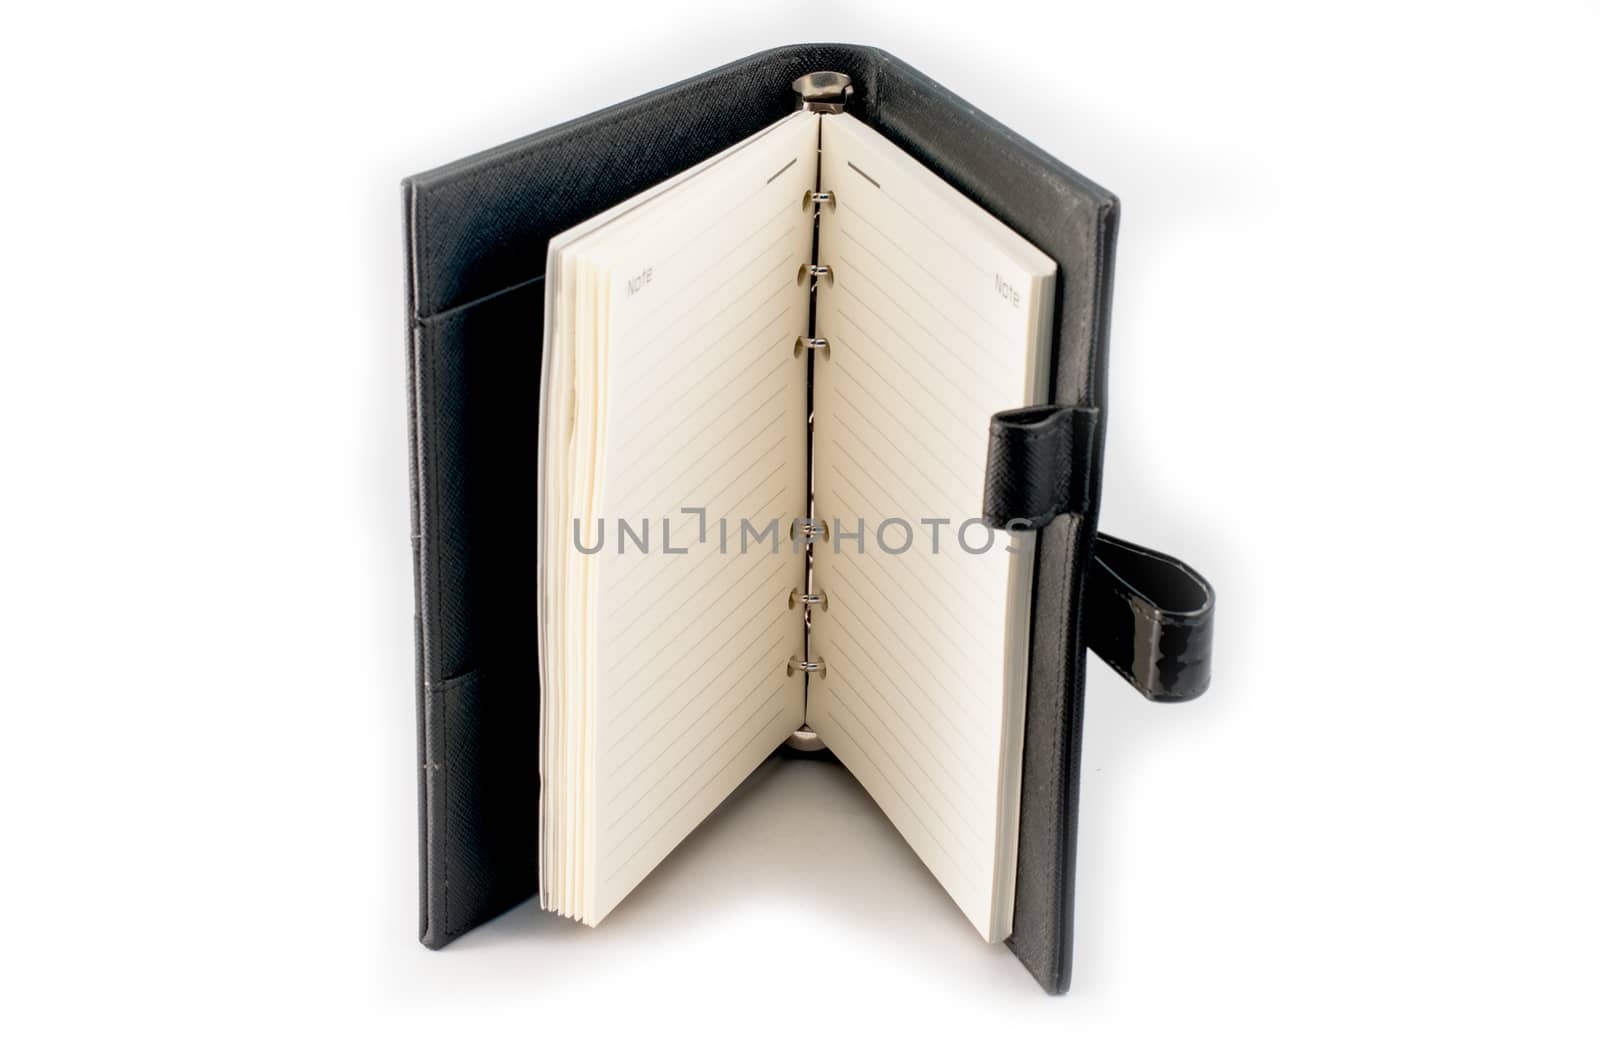 Black note book open on white background